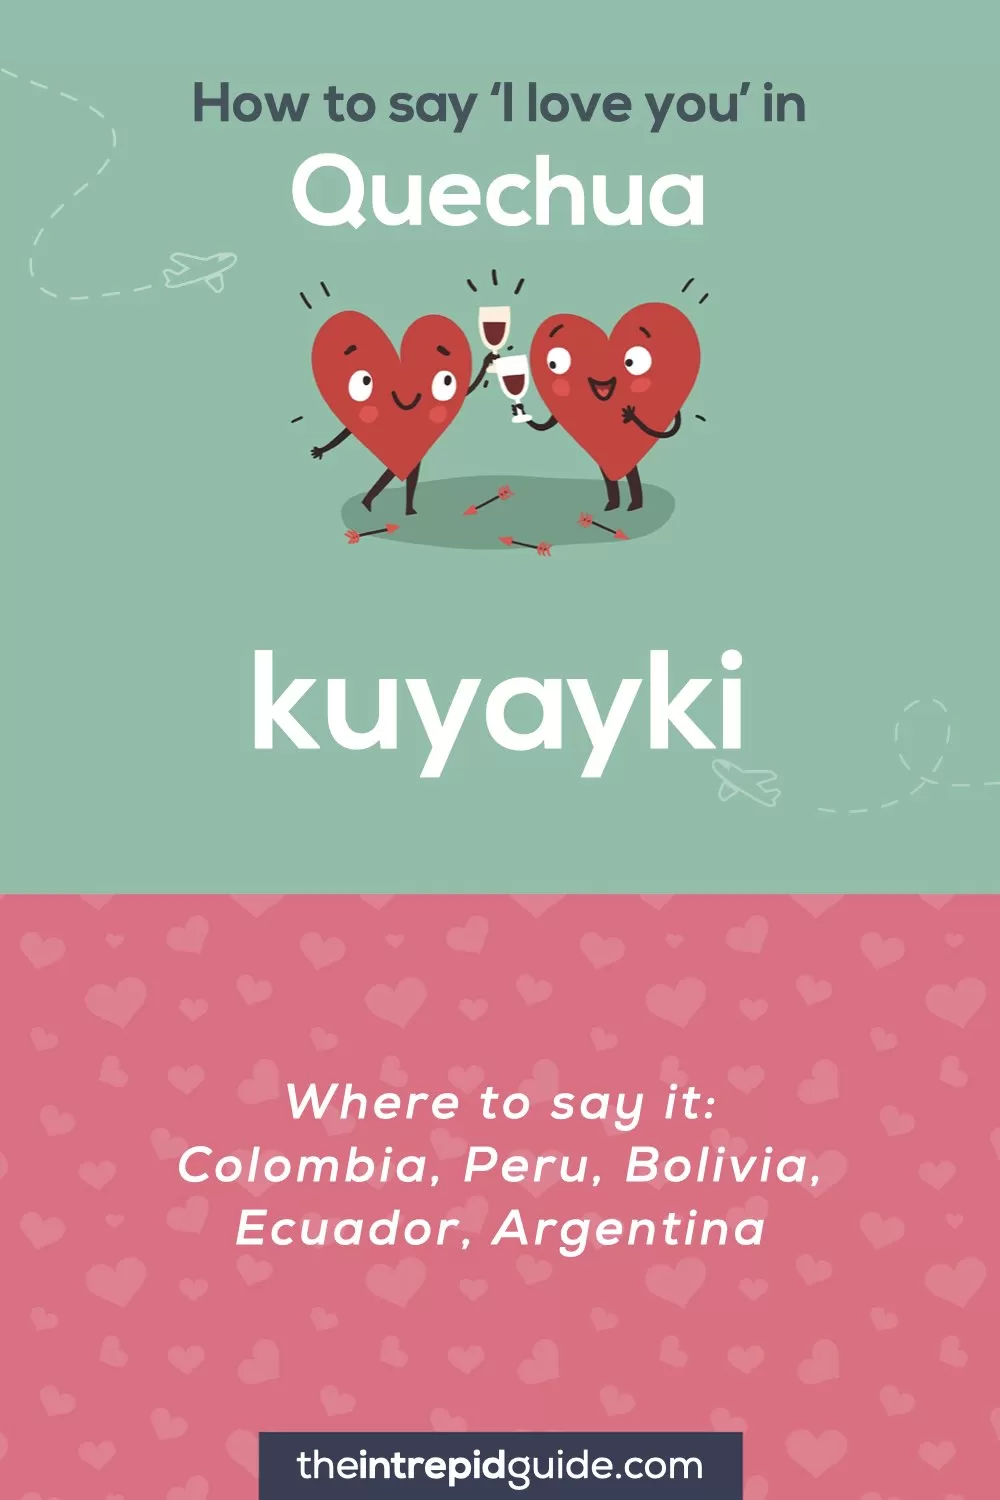 How to say I love you in different languages - Quechua - kuyayki